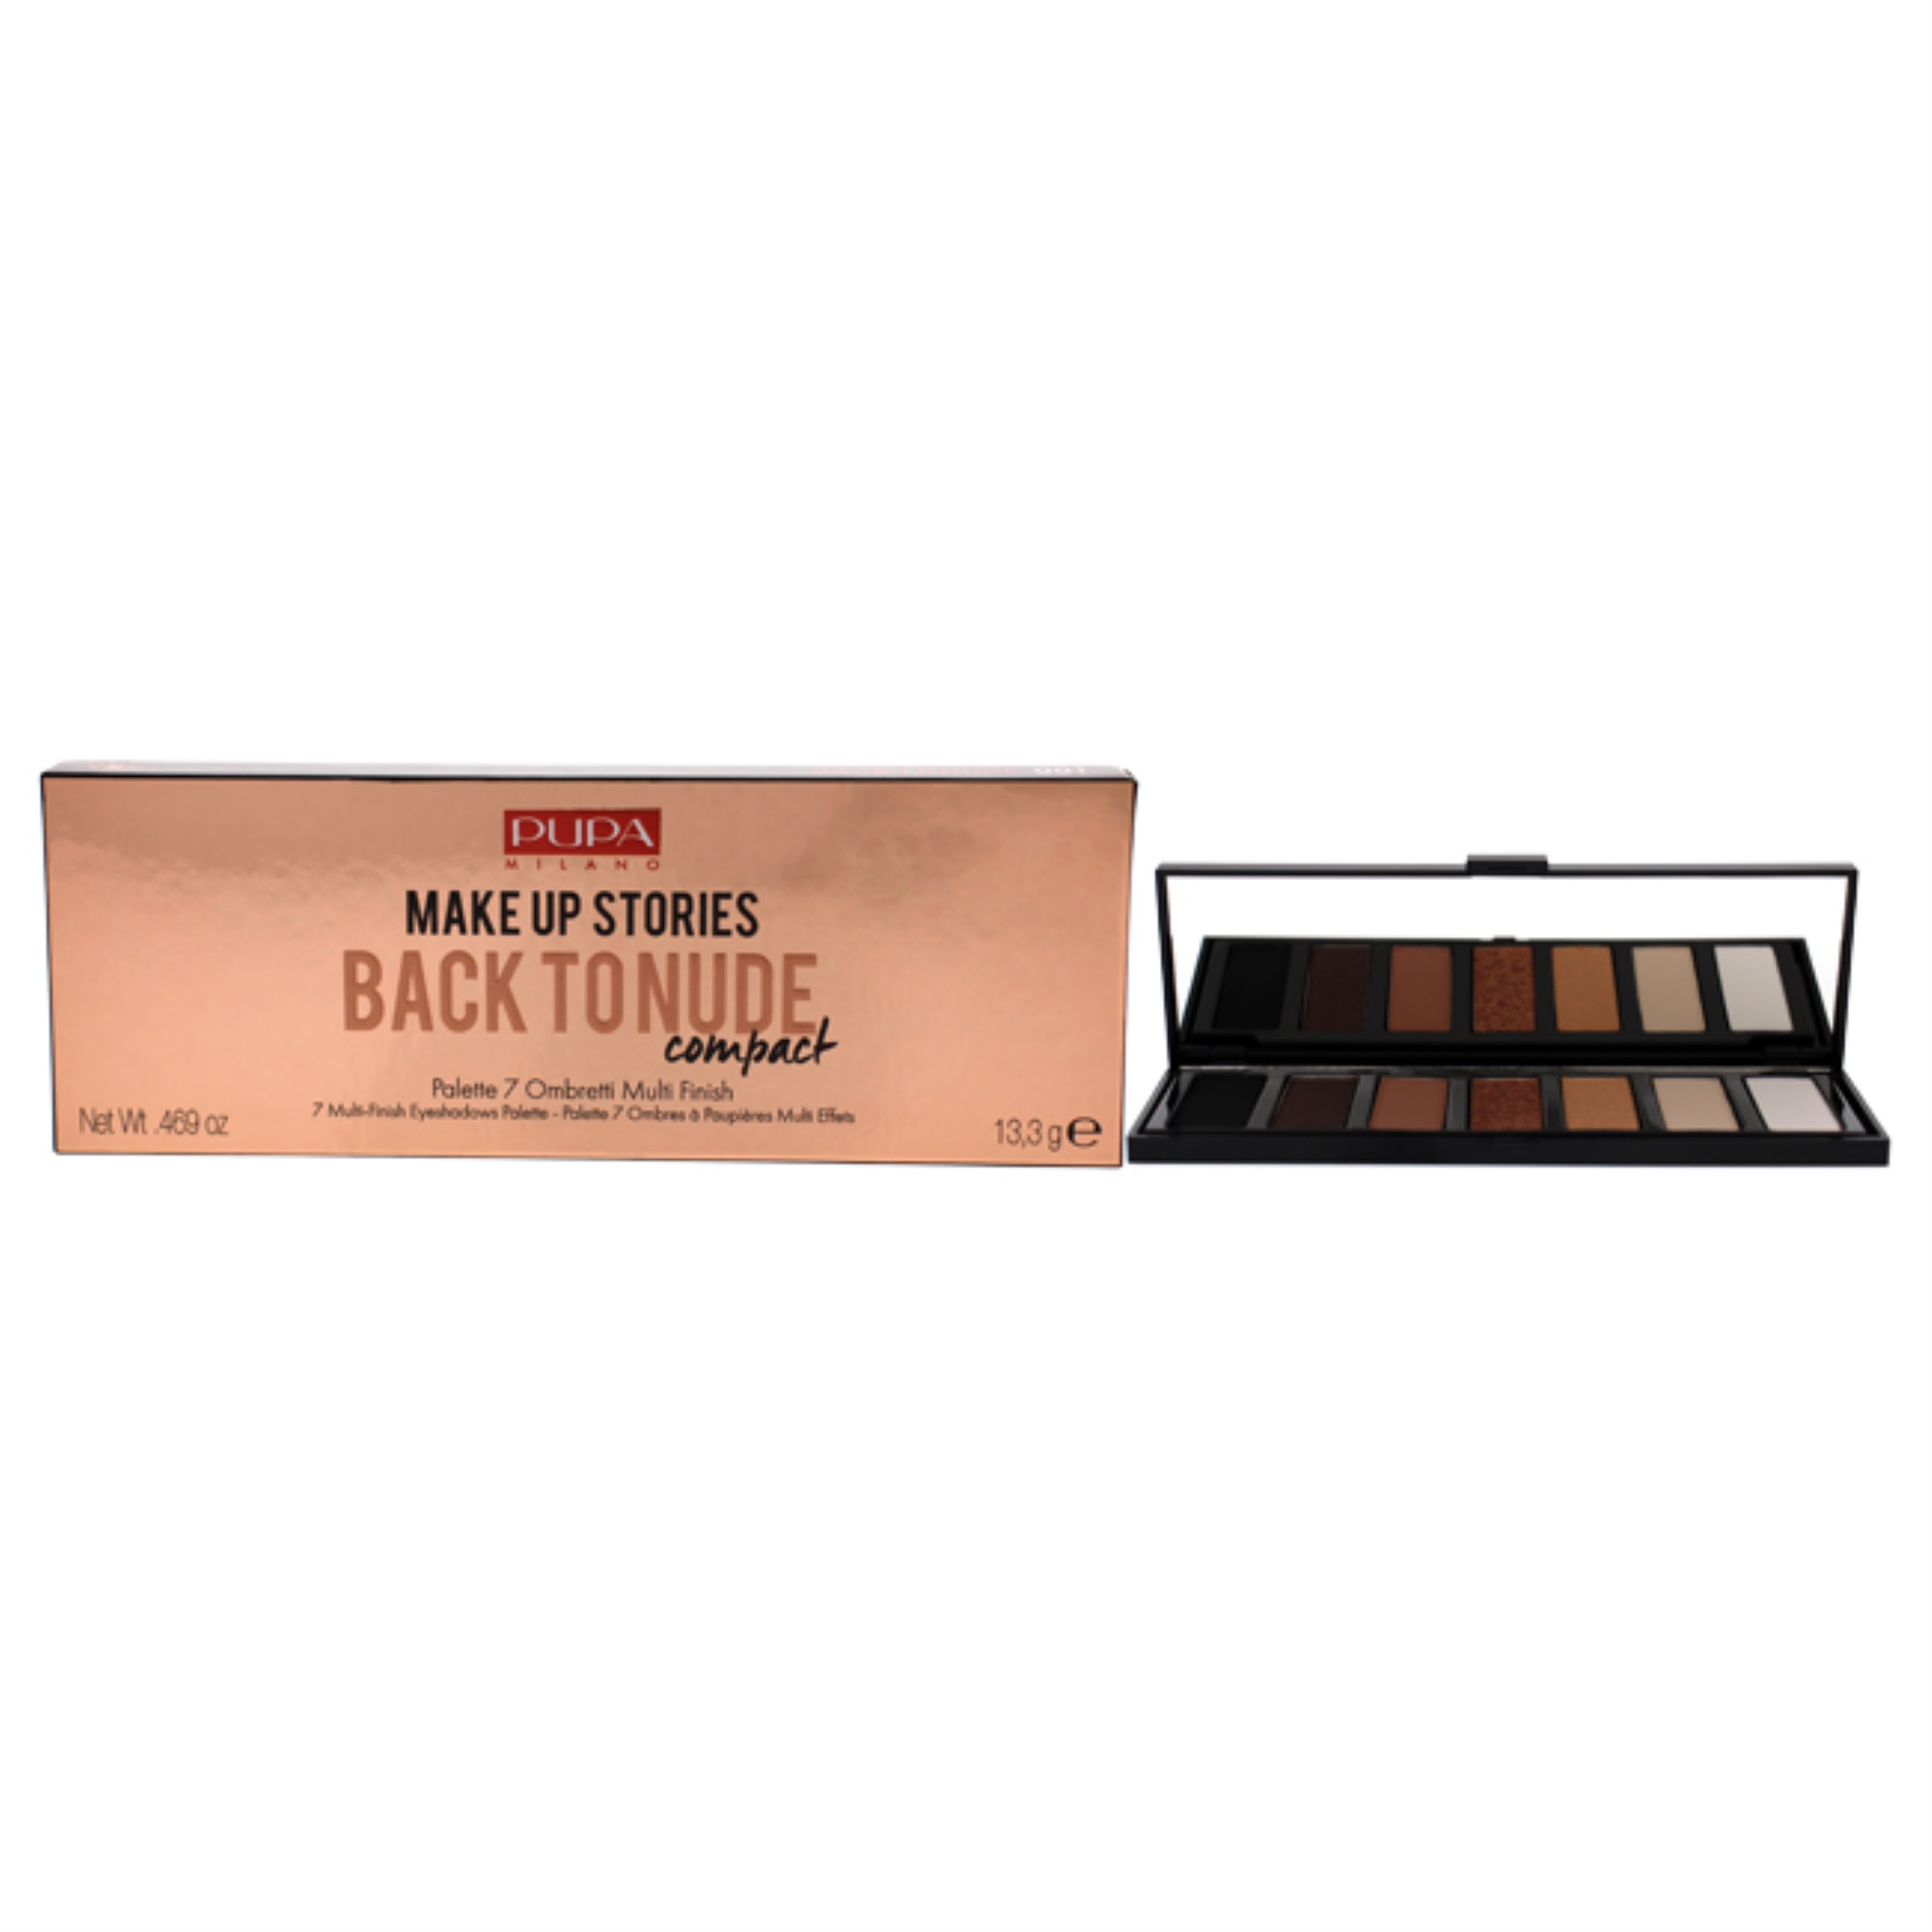 Pupa make up stories compact palette christian wwe